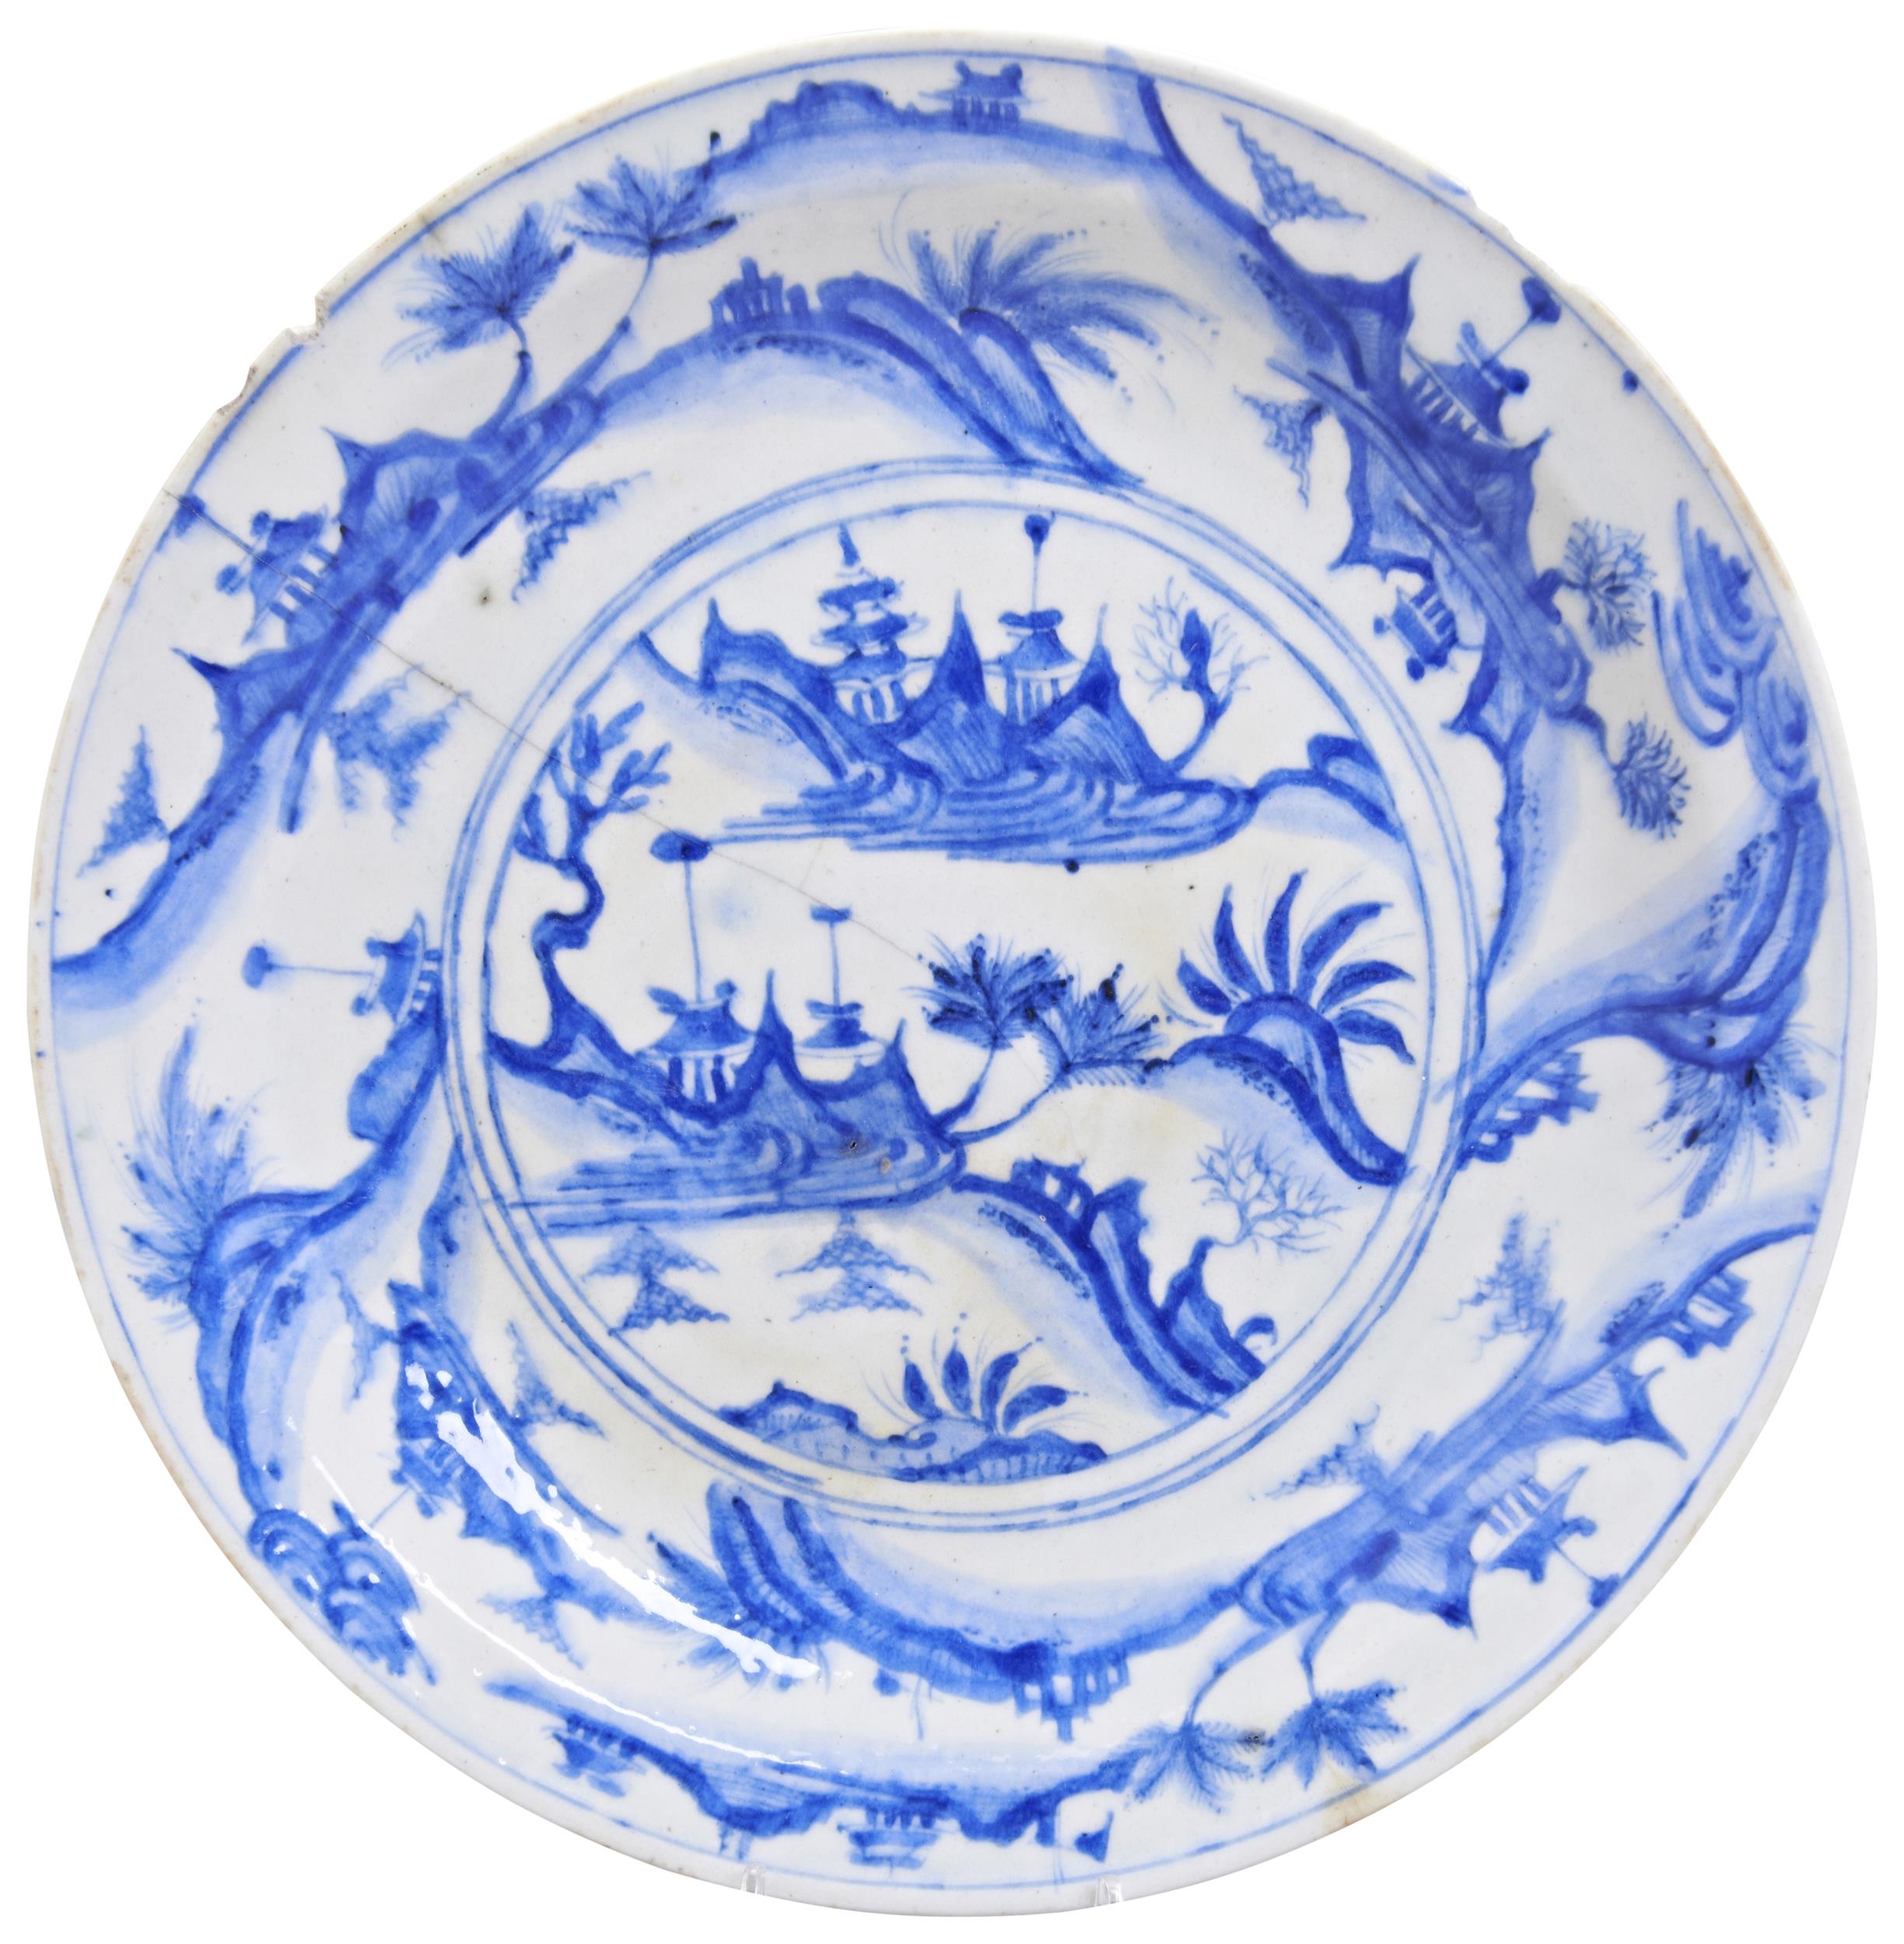 A LARGE SAFAVID BLUE AND WHITE POTTERY DISH PERSIA, 17TH CENTURY 十七世纪萨法维 波斯青花盘 painted with a